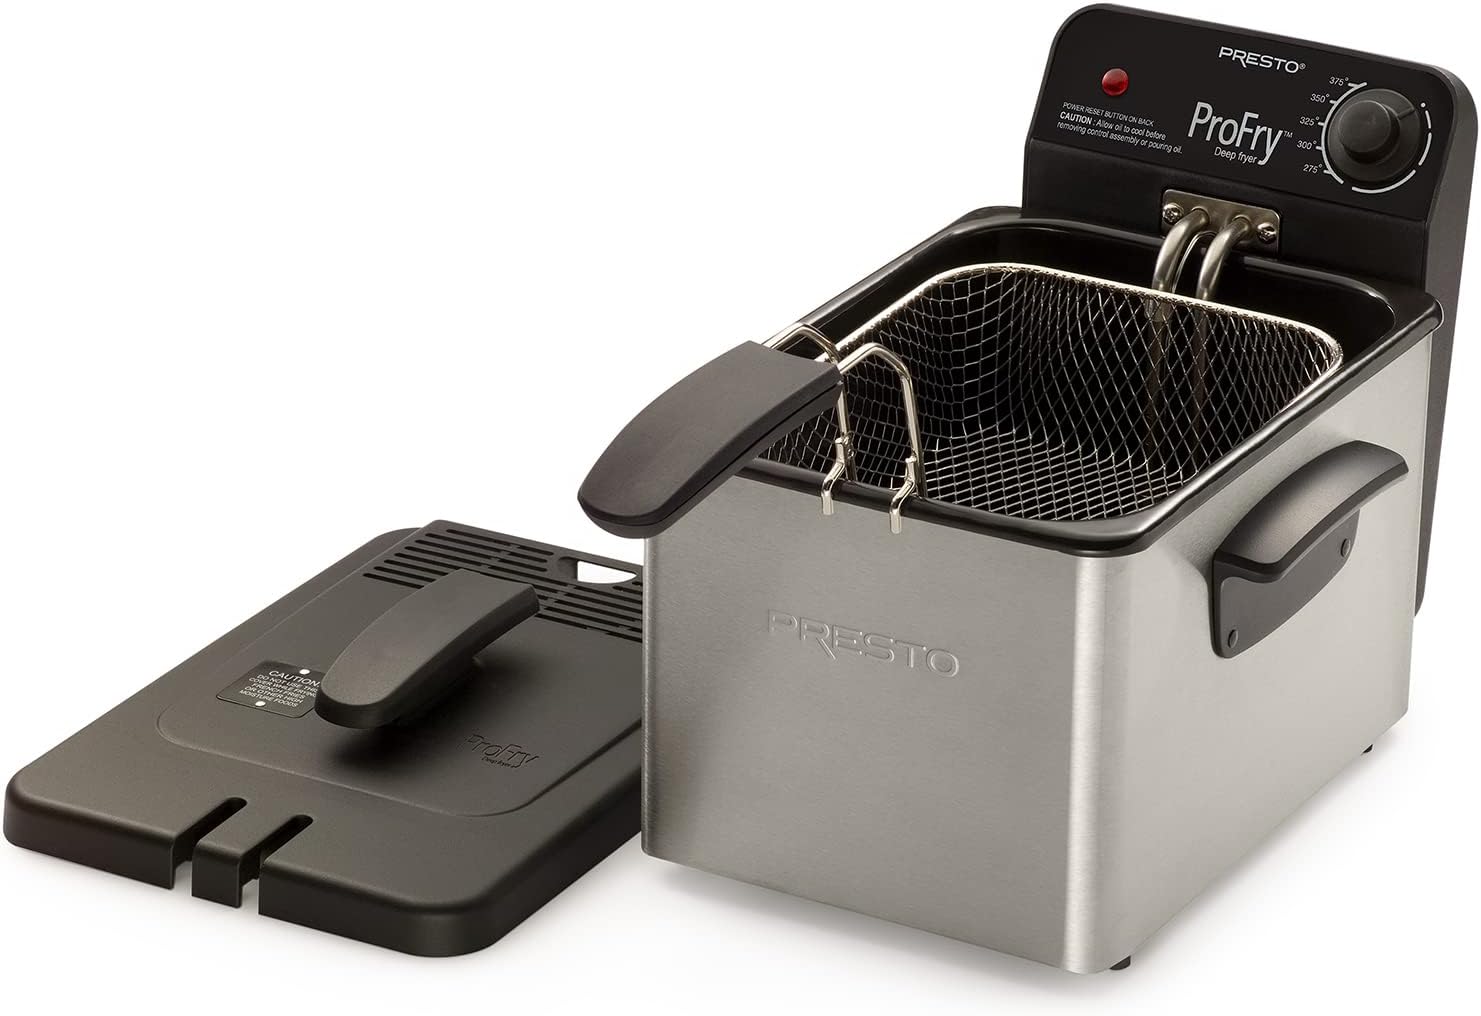 National Presto 05461 Stainless Steel Fryer Review